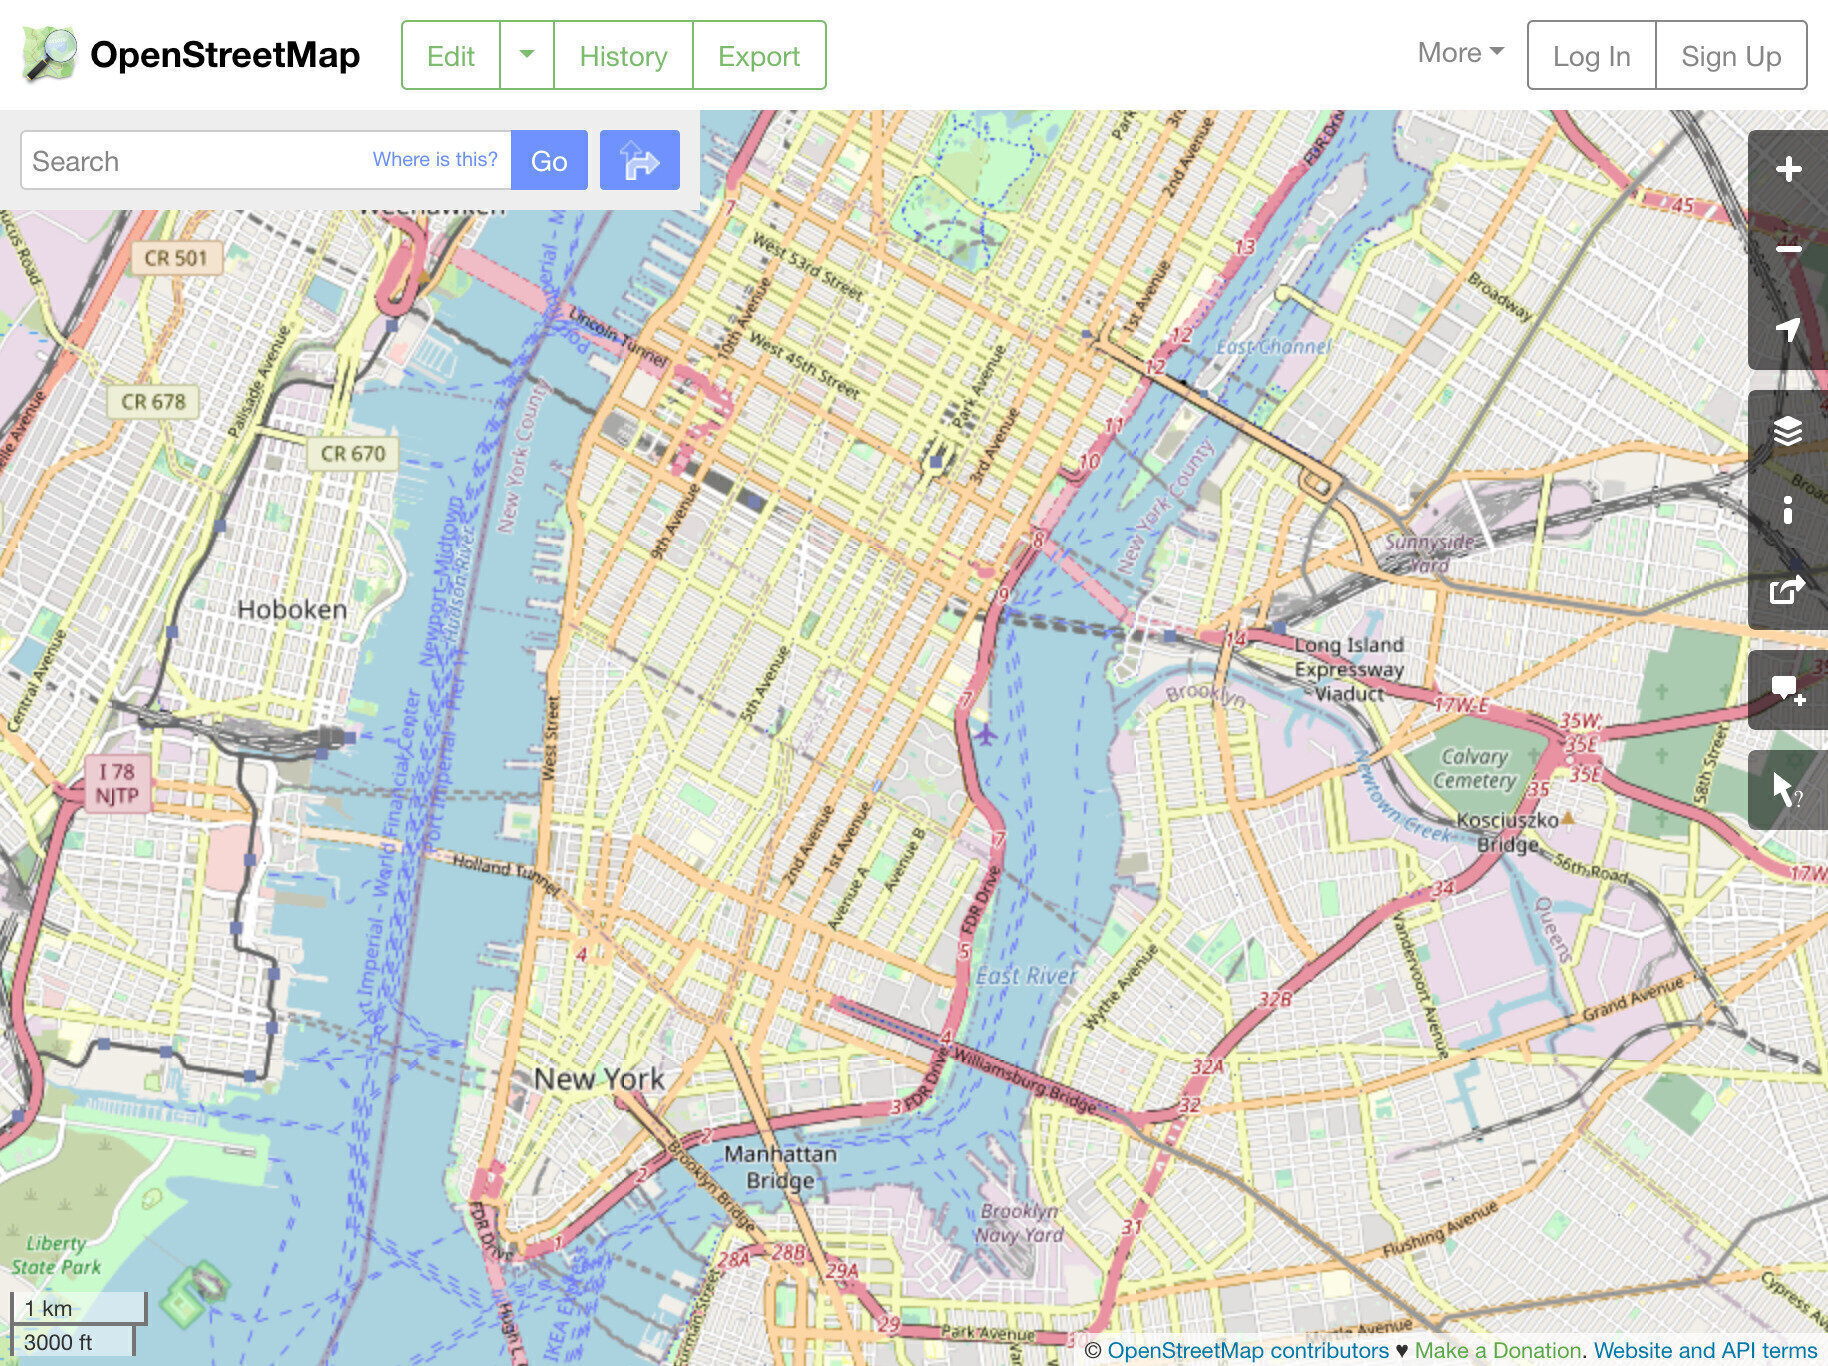 a screenshot from openstreetmap.org centered on New York City